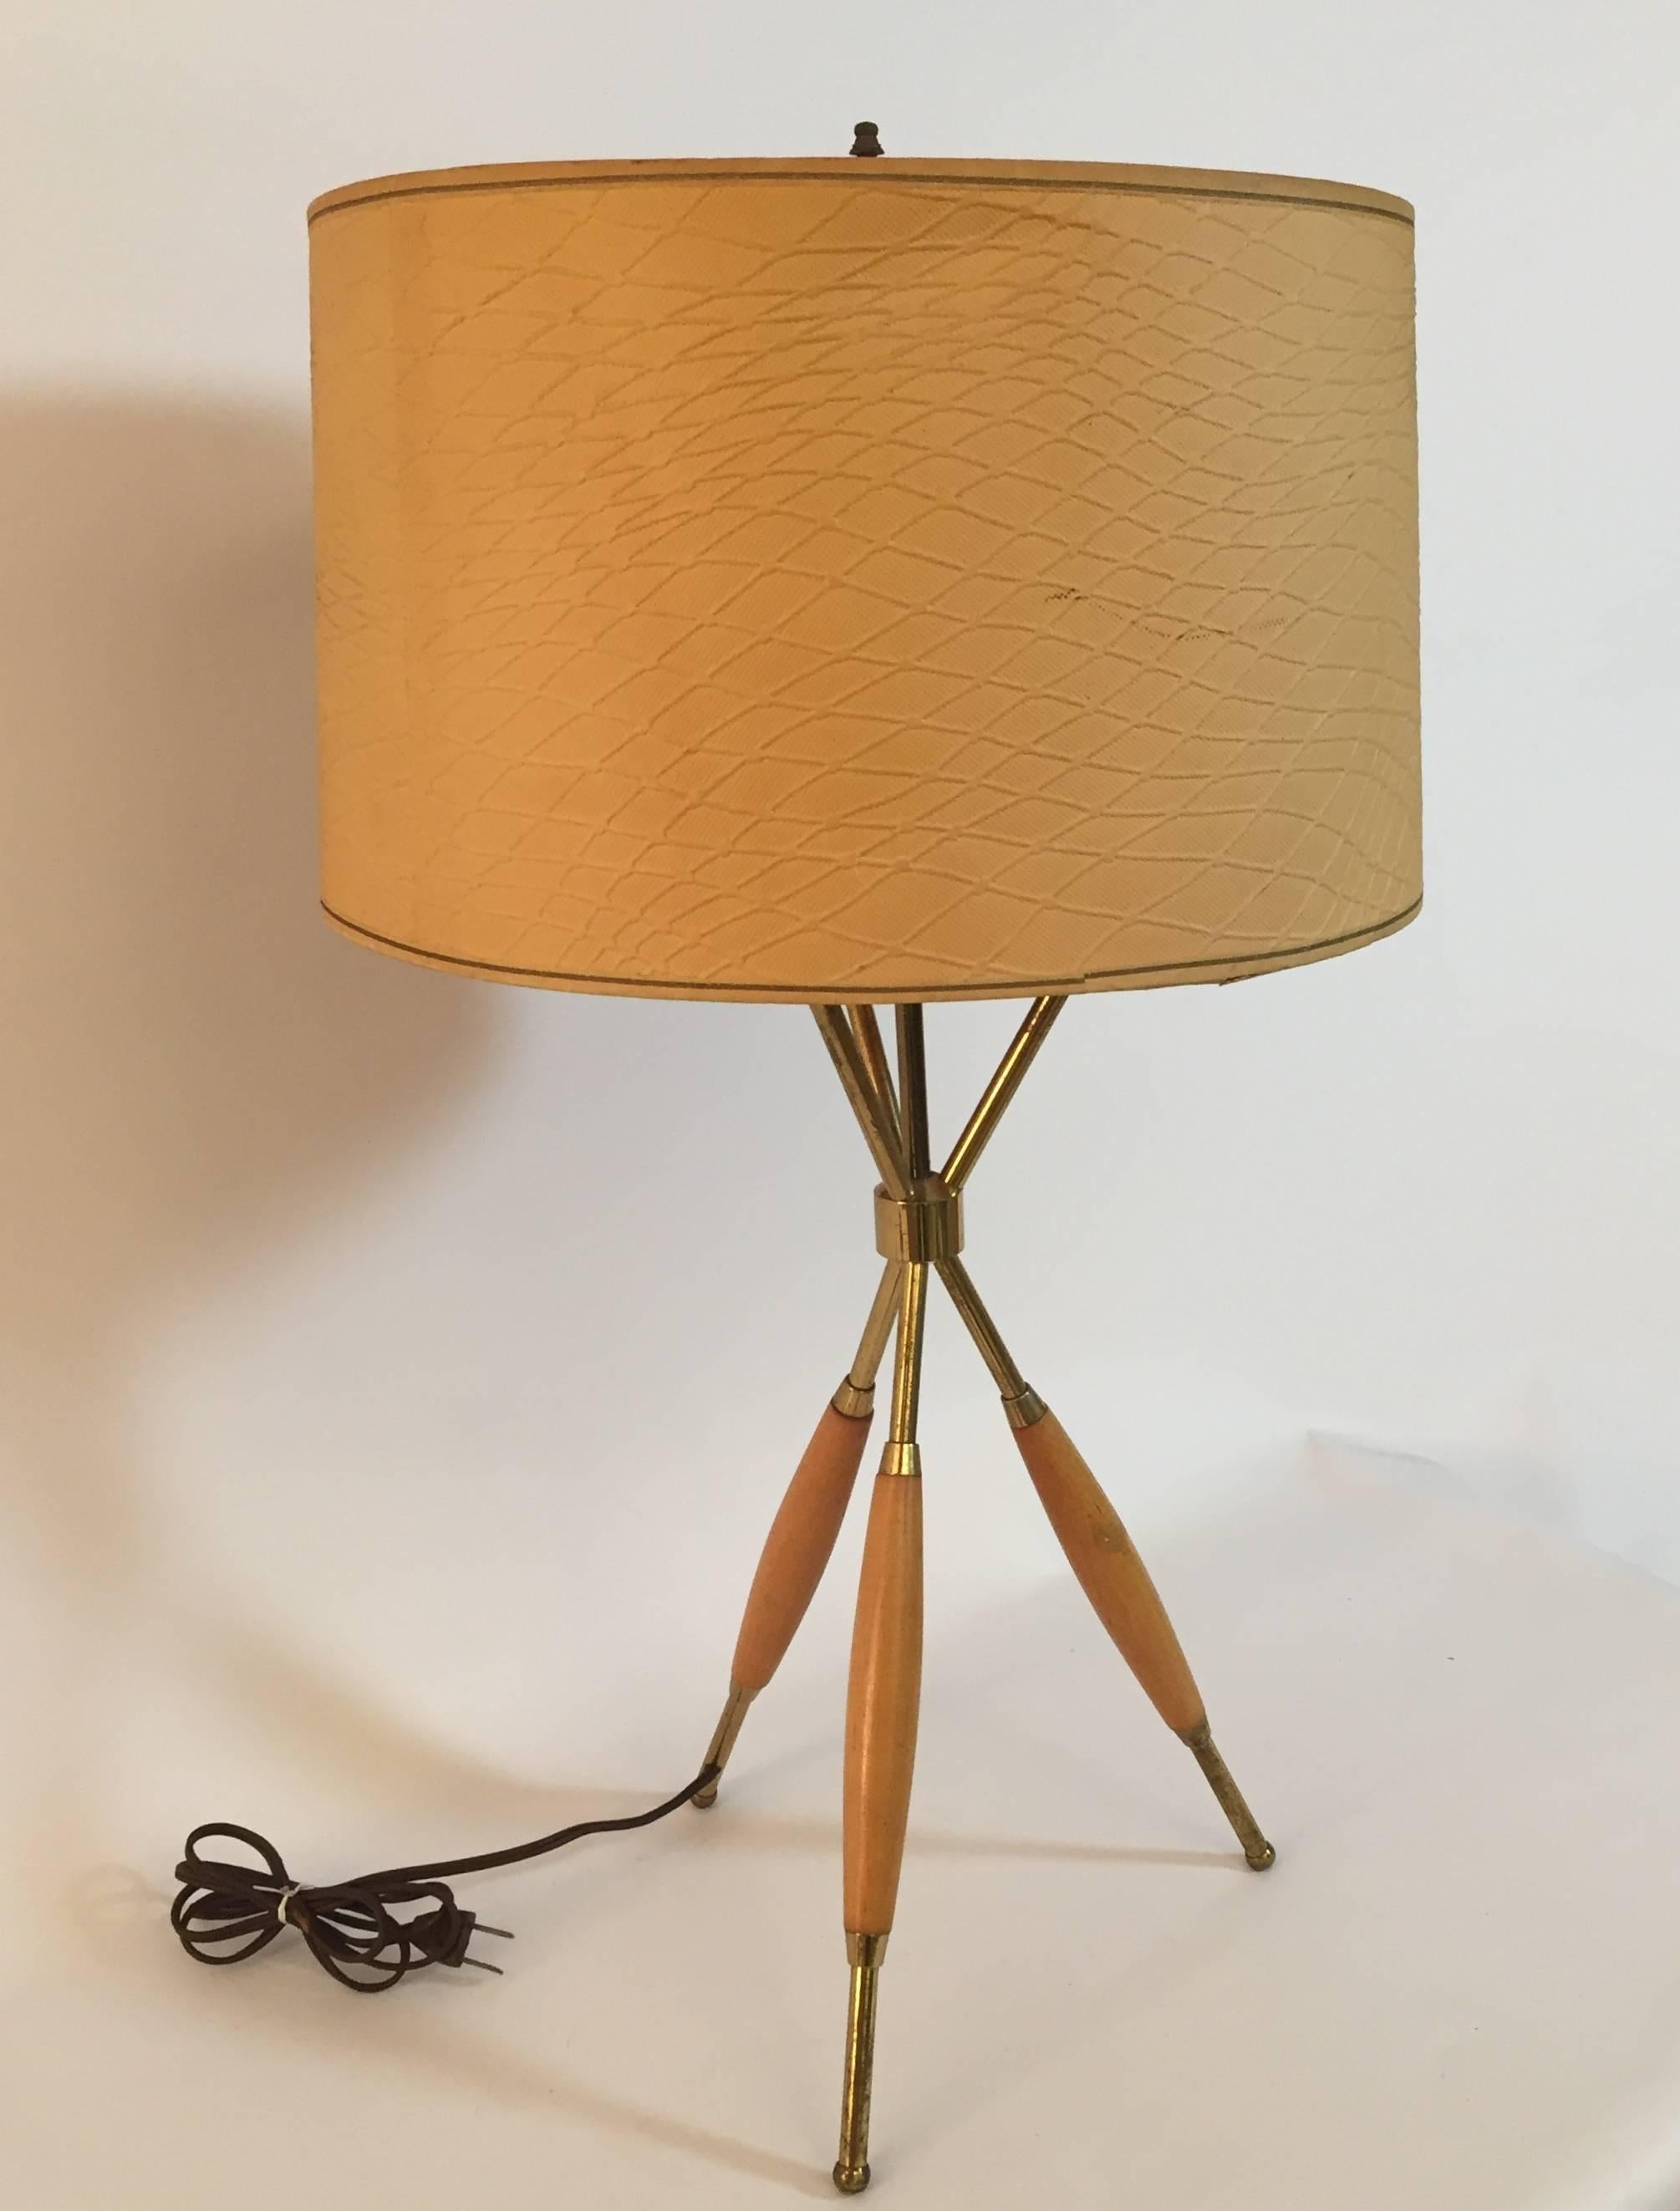 Nice early Thurston design for Lightolier. Single bulb with brass plated feet and stems with wood accents. Shade for photographic purposes only and is not included.

Measures 25.5